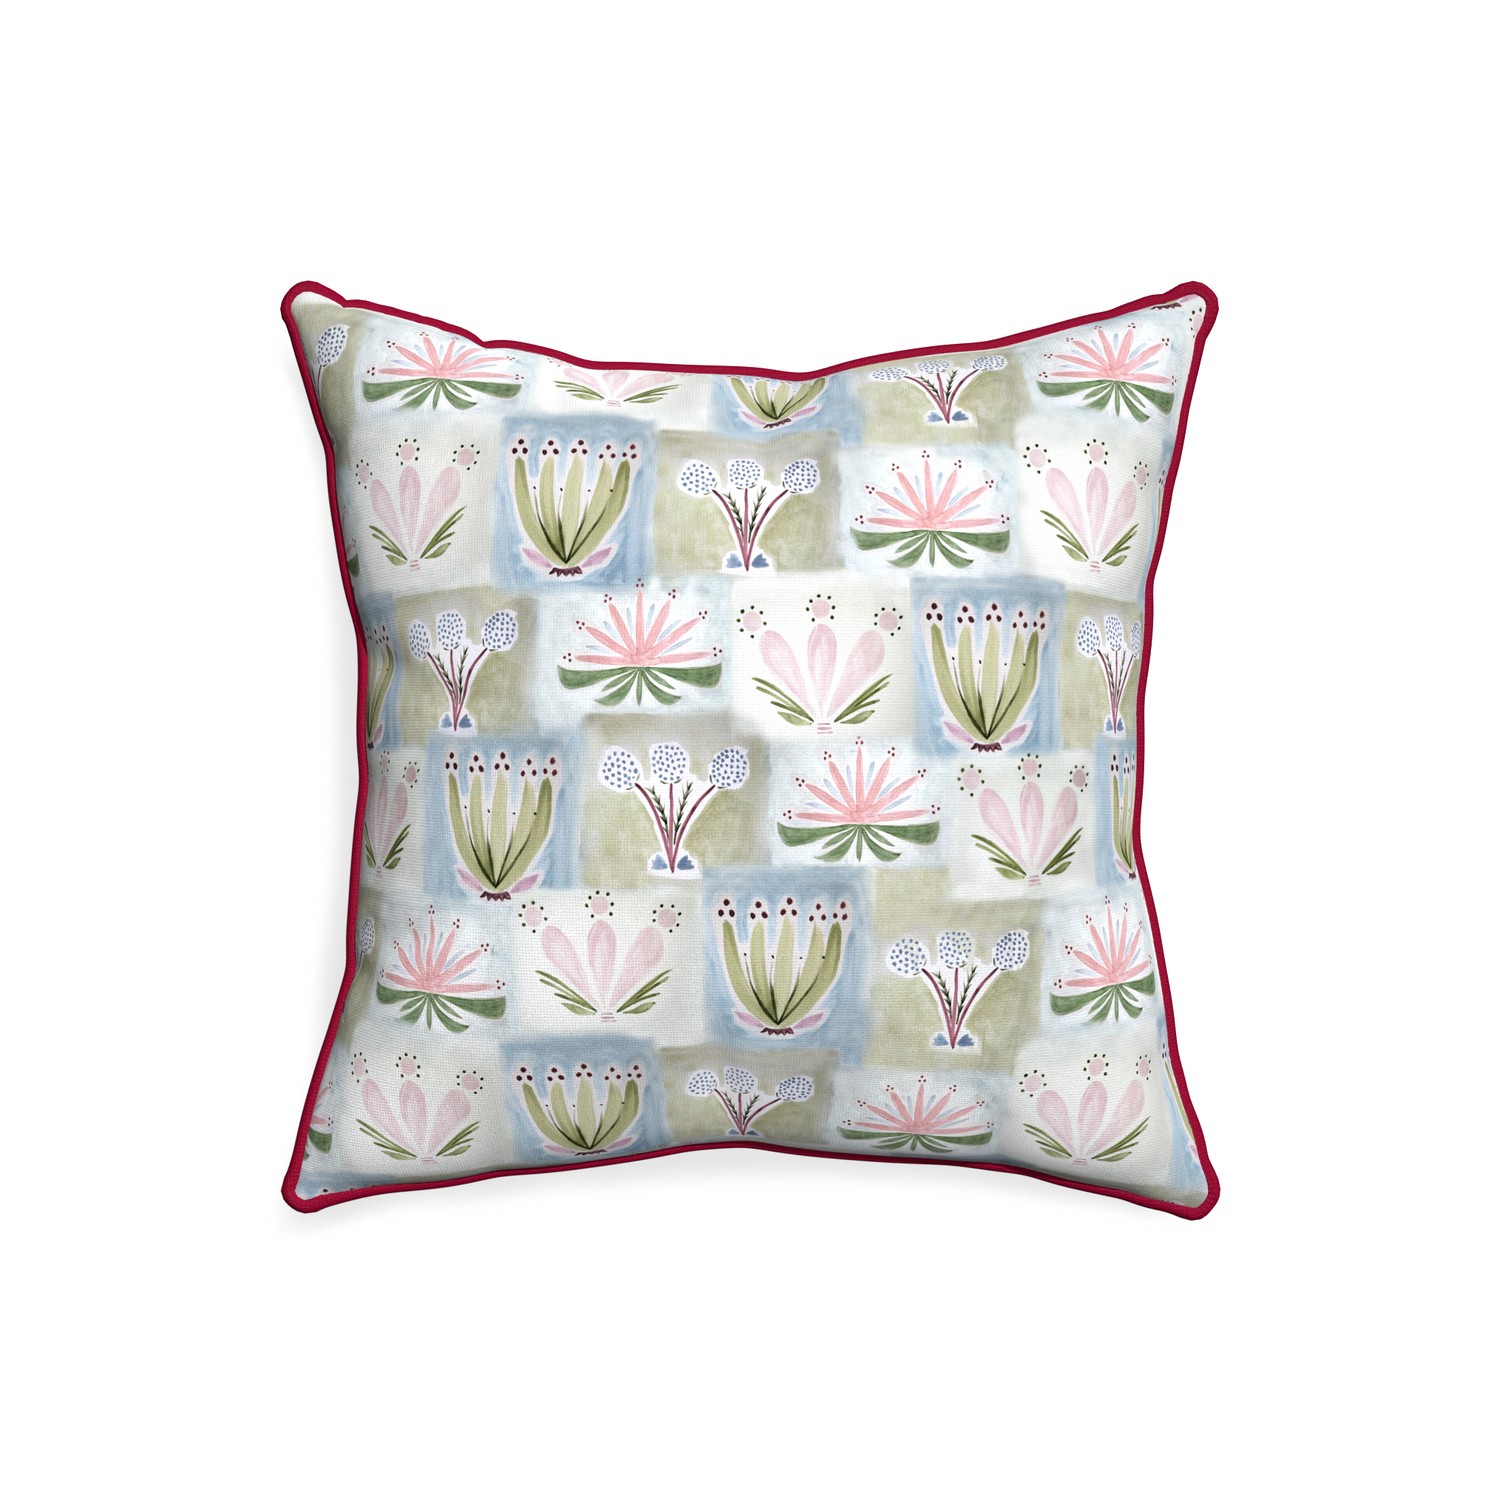 20-square harper custom pillow with raspberry piping on white background